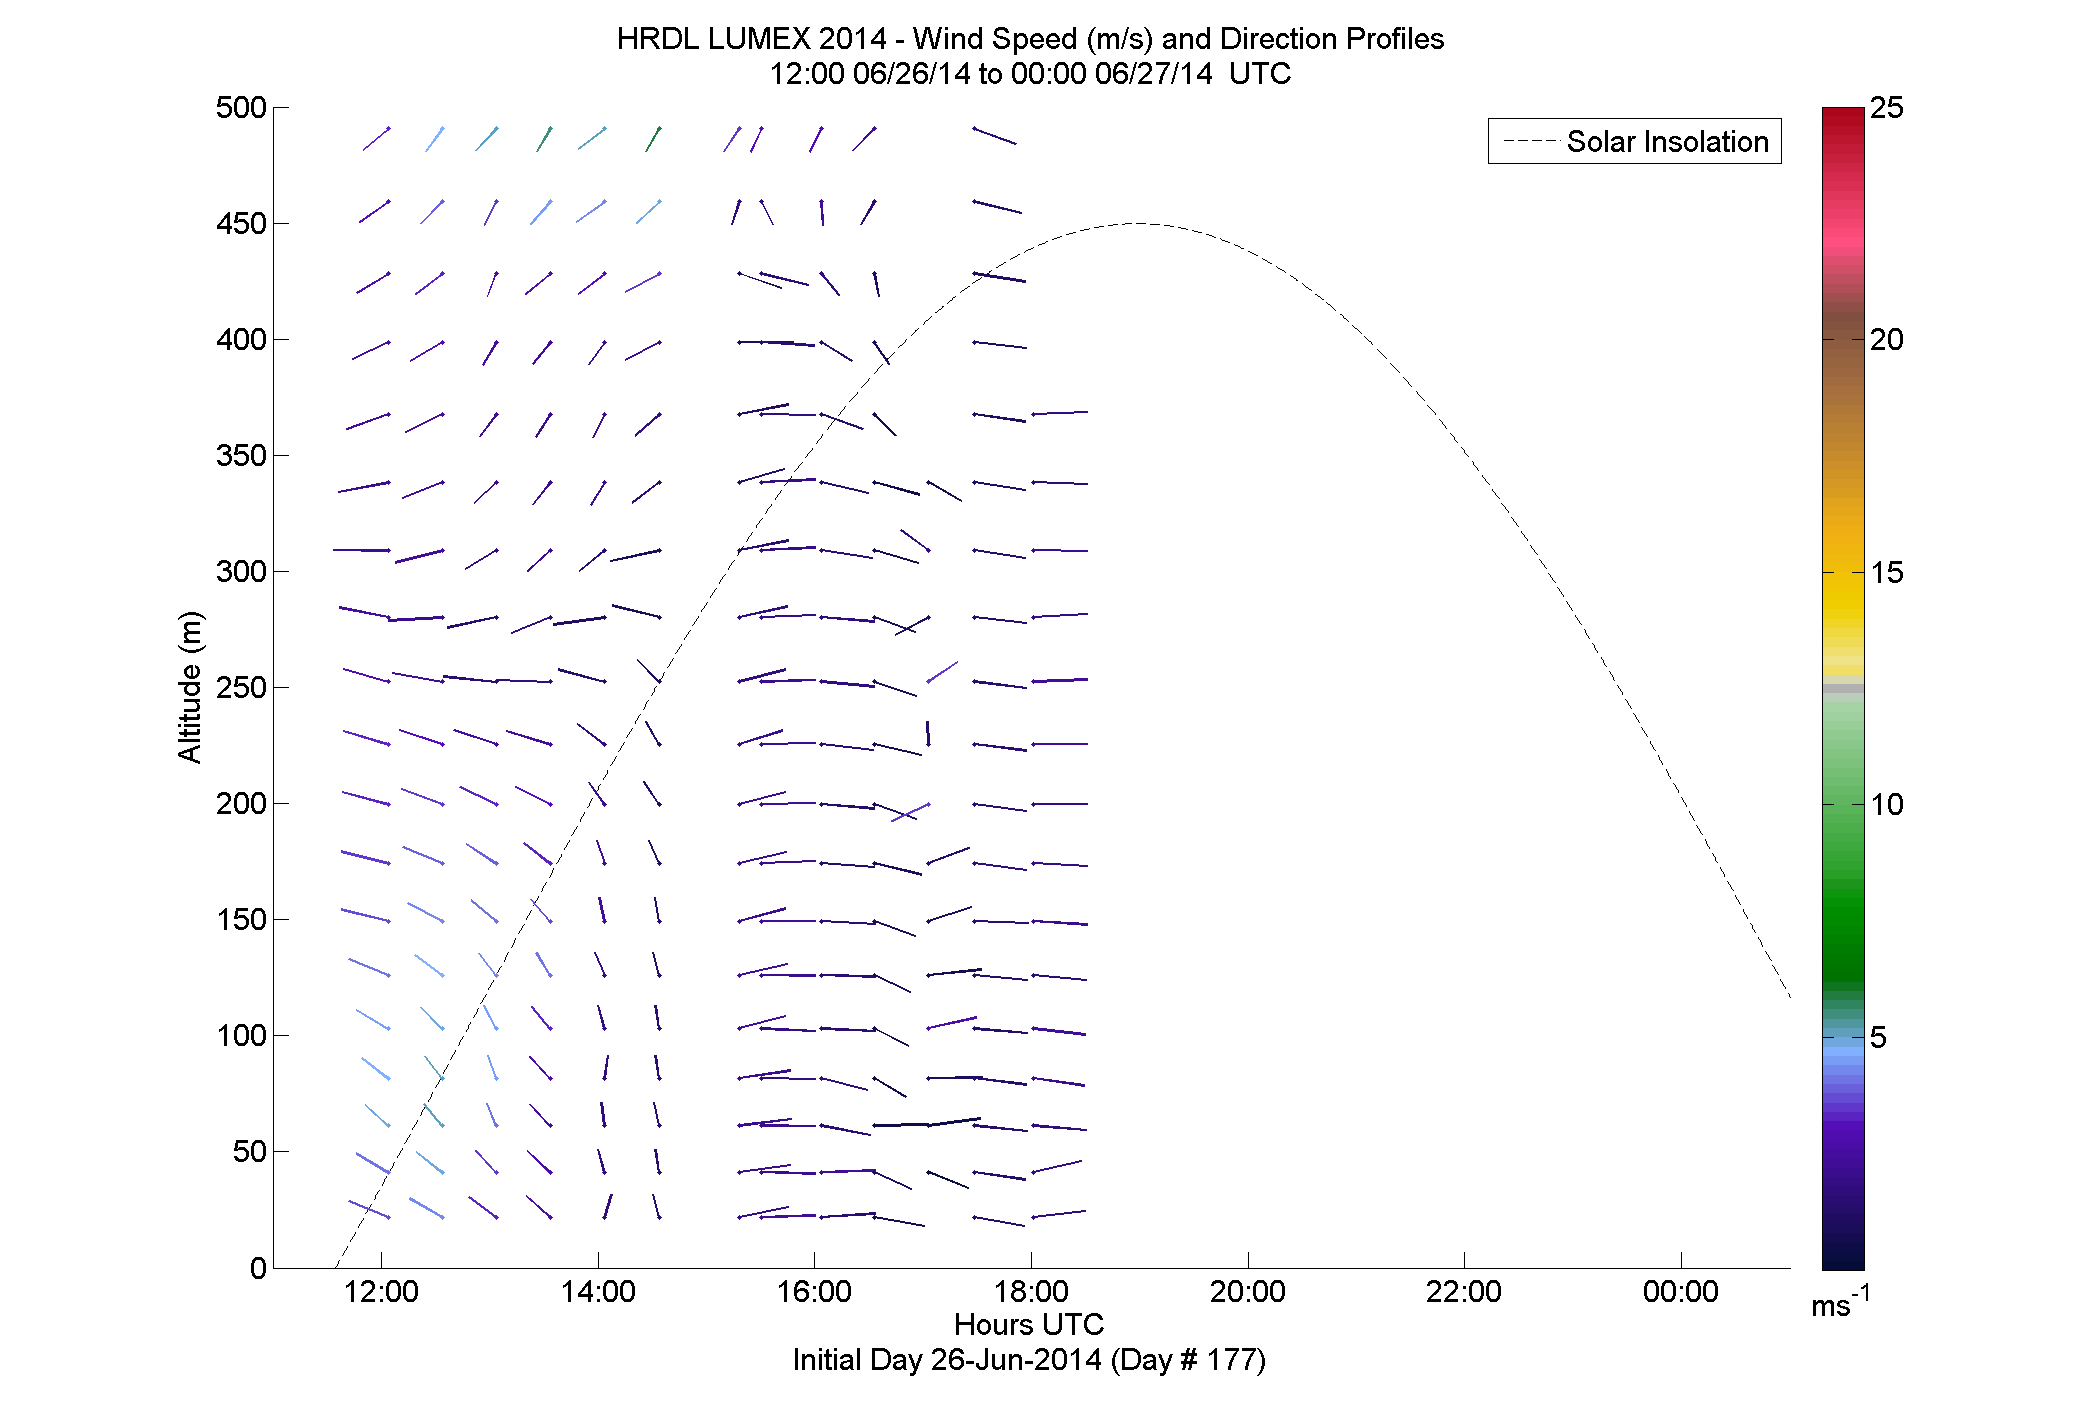 HRDL speed and direction profile - June 26 pm